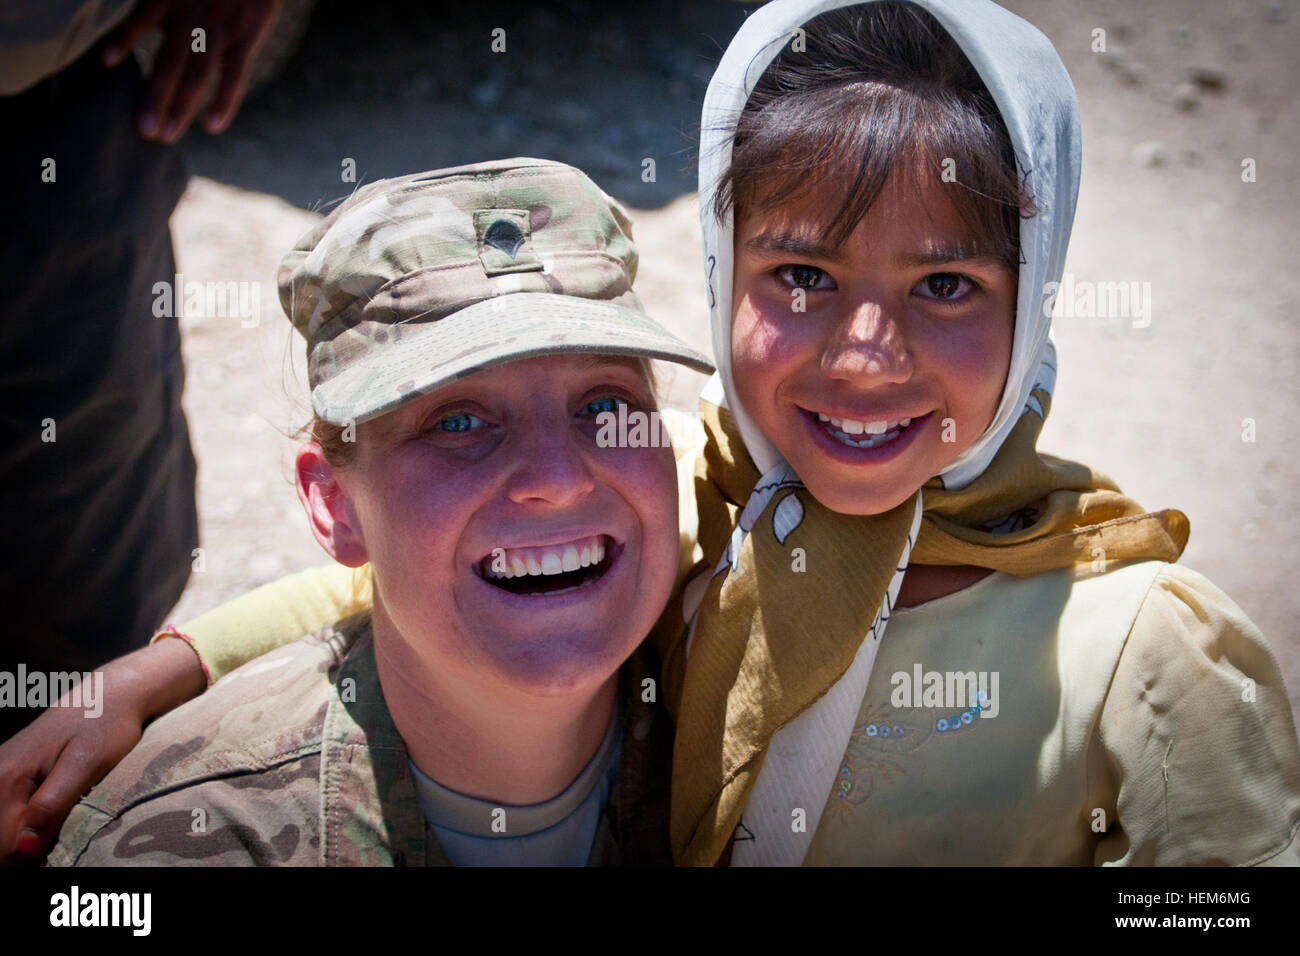 PARWAN PROVINCE, Afghanistan -- U.S. Army Spc. Helen Jeschow, a native of Greensborough, N.C., hugs little Sode Jan, an Afghan girl she has befriended over the course of several months of volunteer work at the Egyptian Field Hospital on Bagram Air Field.  Jeschow is an information support operations specialist with the 340th Military Information Support Operations unit, Task Force Tsunami. (U.S. Army photo by Sgt. Ken Scar, 7th Mobile Public Affairs Detachment) Greensboro, NC, native serves with big heart, helps Afghan children 120603-A-ZU930-003 Stock Photo